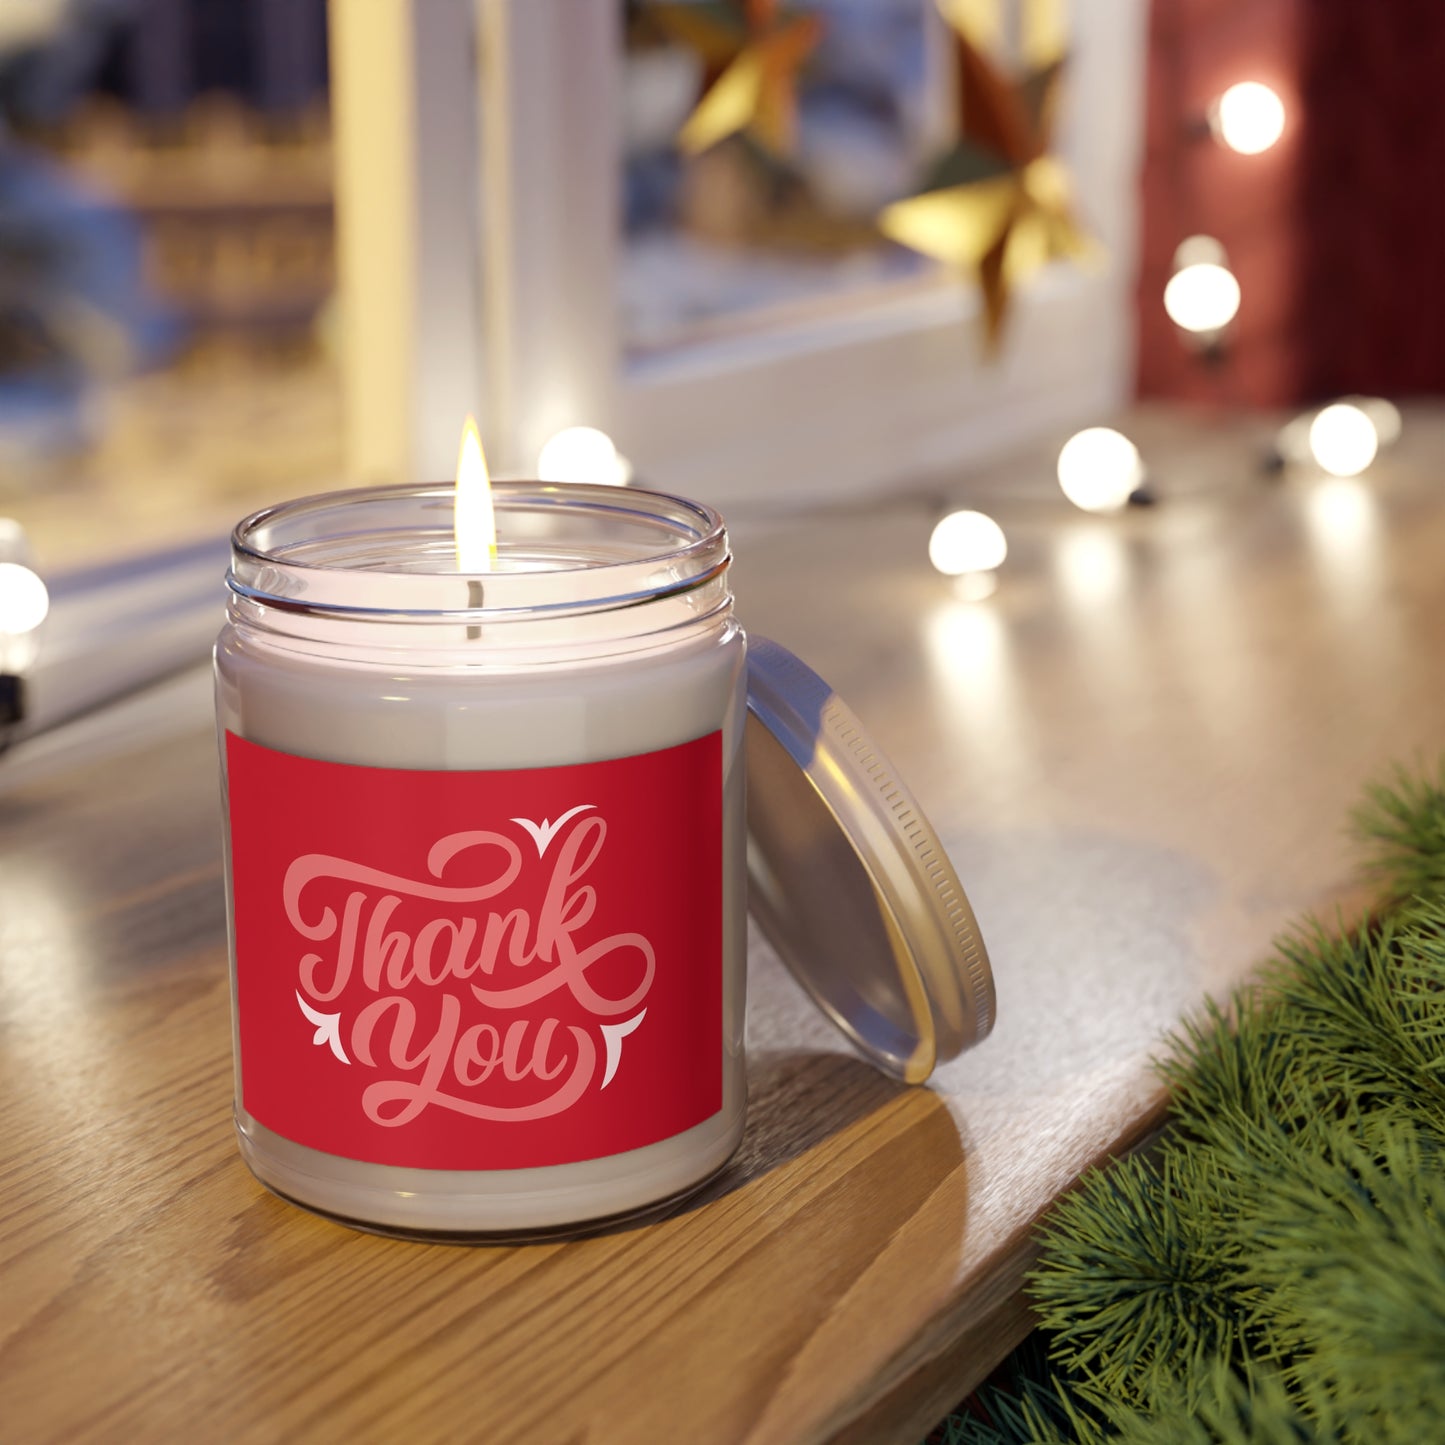 Thank You Scented Candles, 9oz